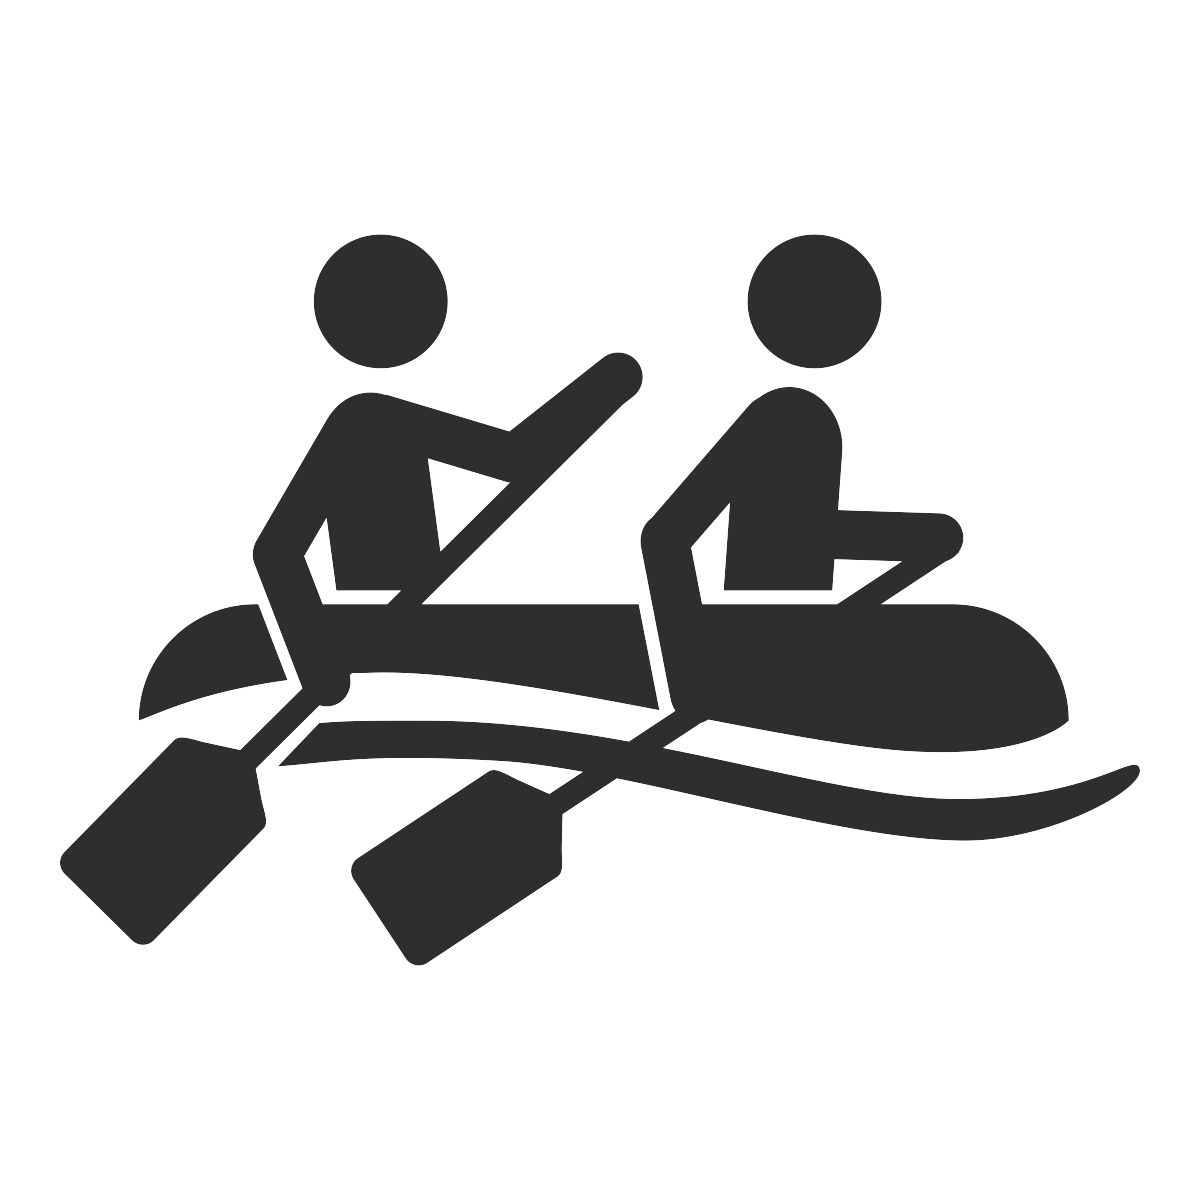 Kayaking clipart rafting. Ultimate descents nepal and